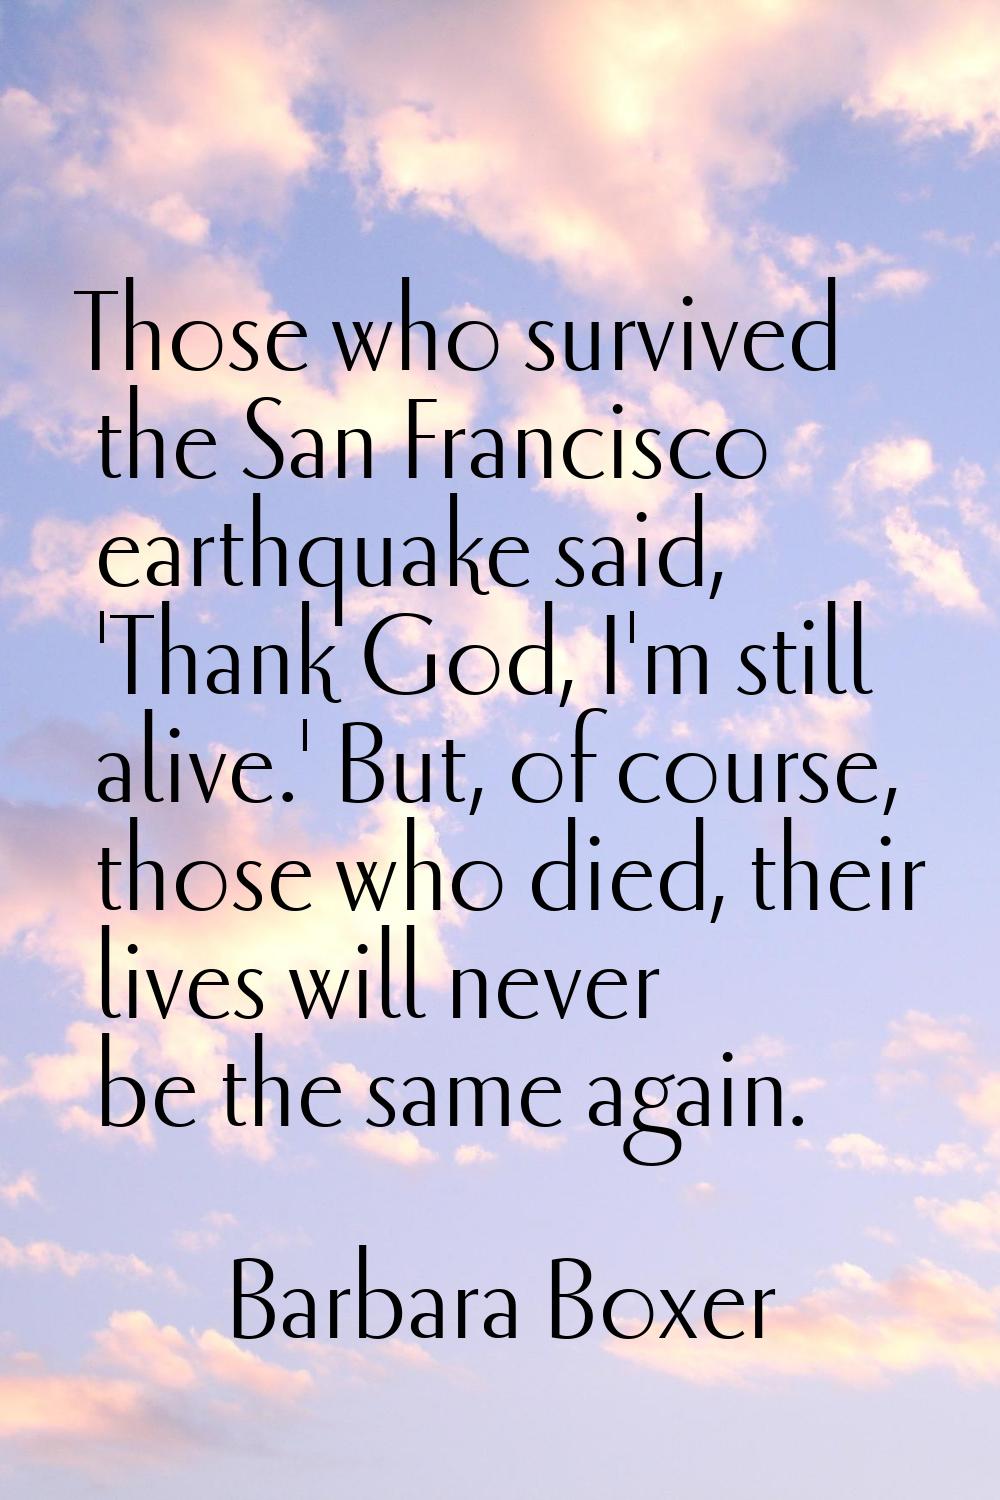 Those who survived the San Francisco earthquake said, 'Thank God, I'm still alive.' But, of course,